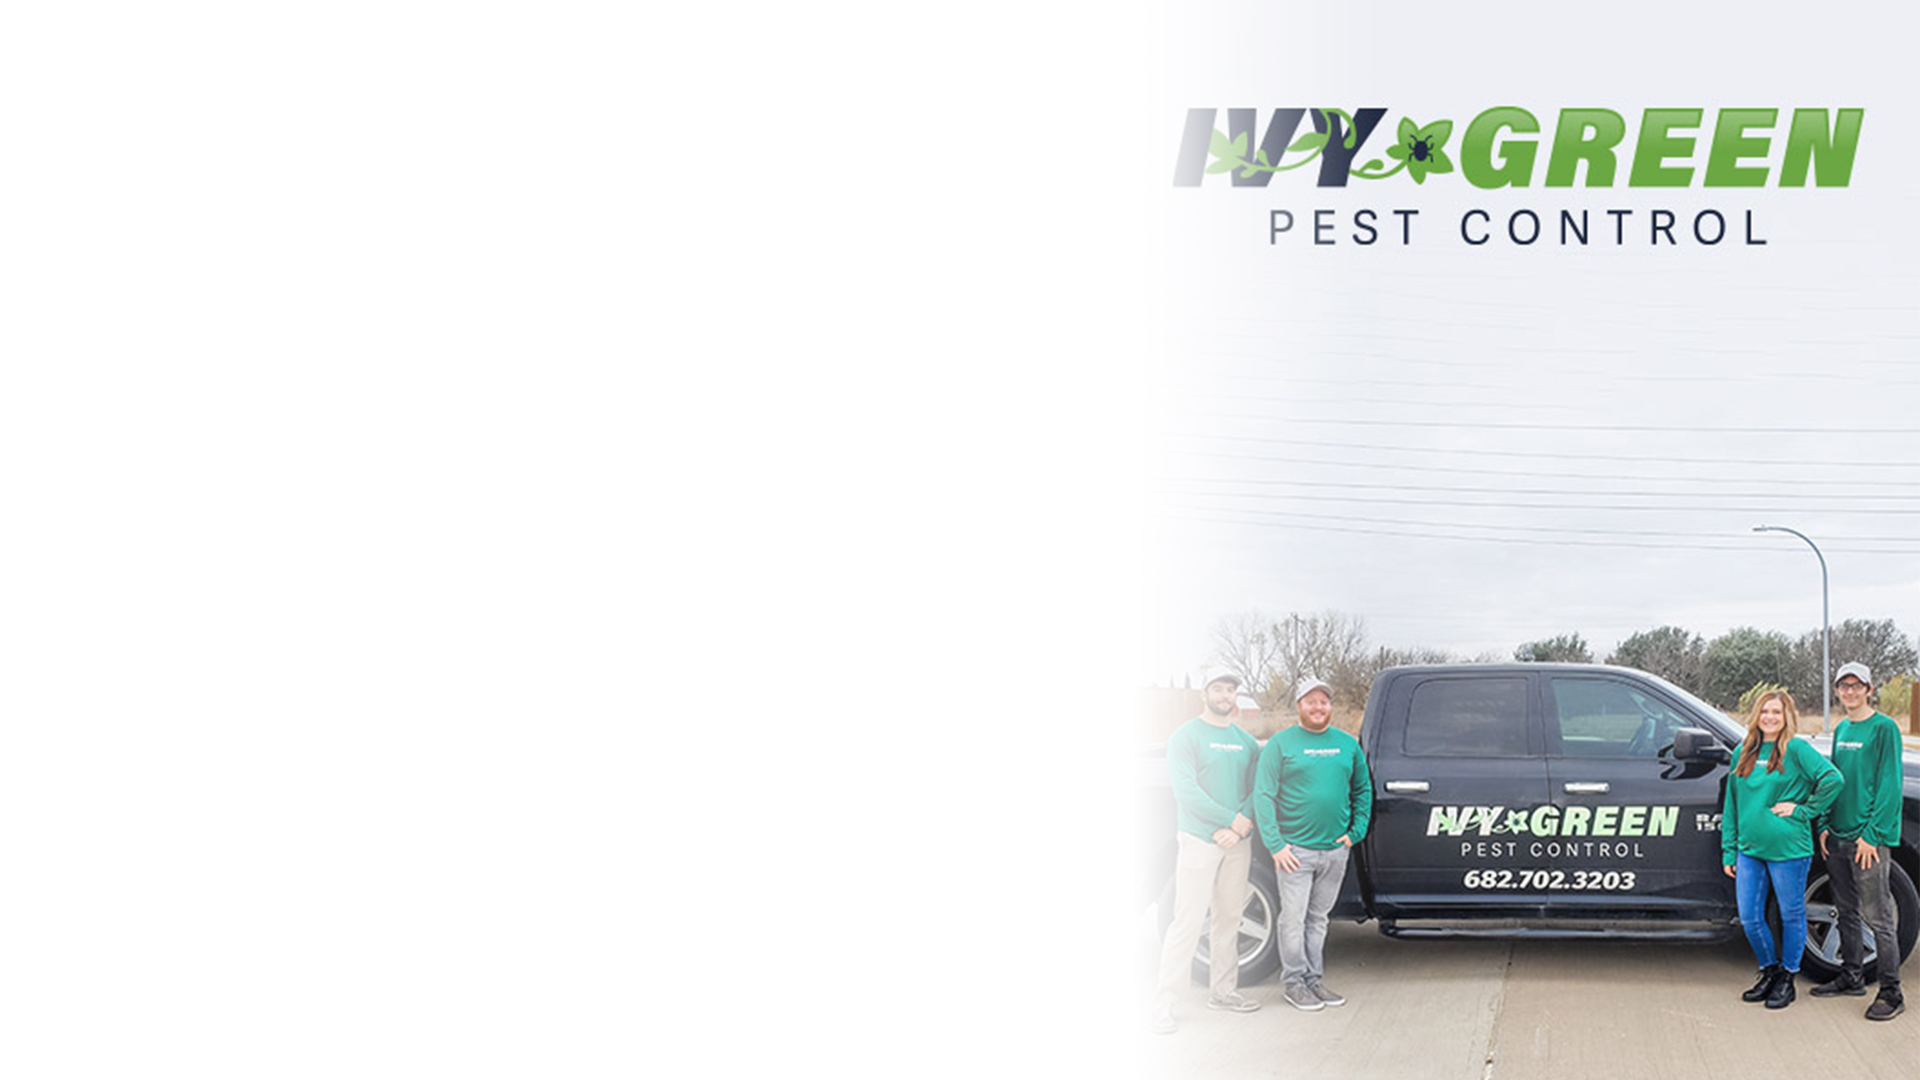 ivy greens pest control team in front of their black truck roanoke tx hero 2